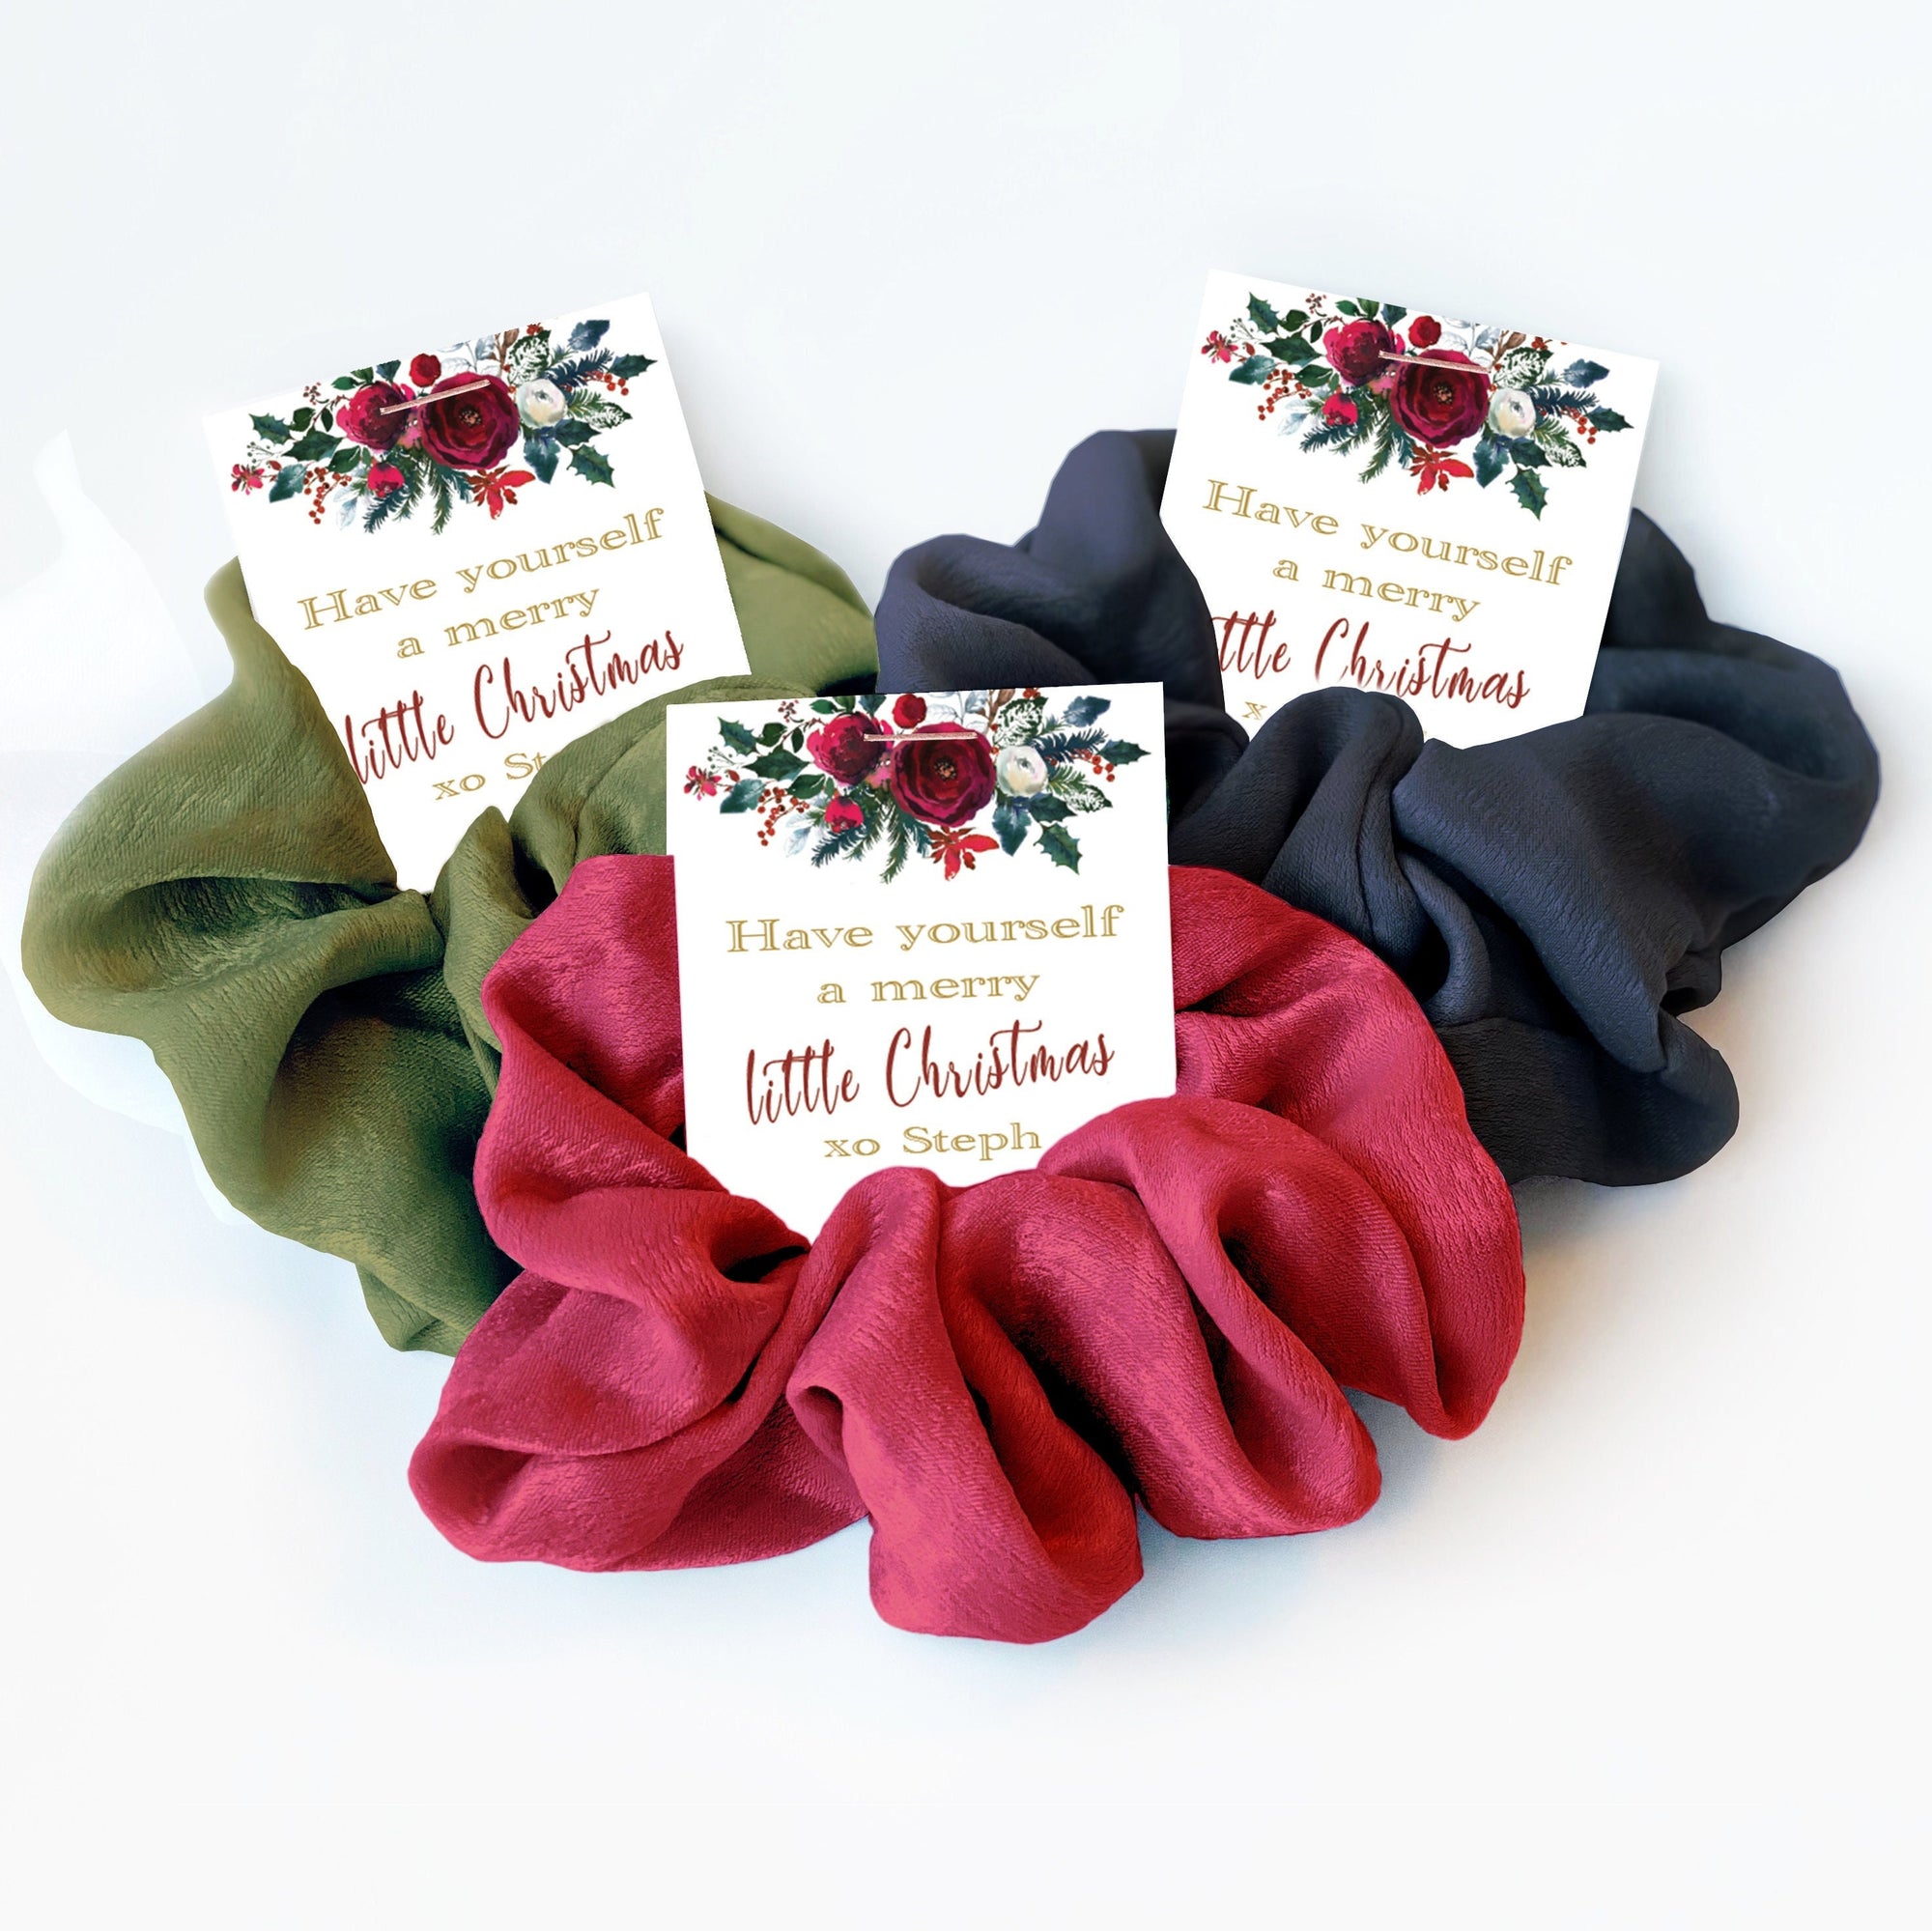 Christmas Gift for Friends, Hair Scrunchie, Stocking Stuffers for Girls and Women, Small Gift, Christmas Party Favors for Women, CG100